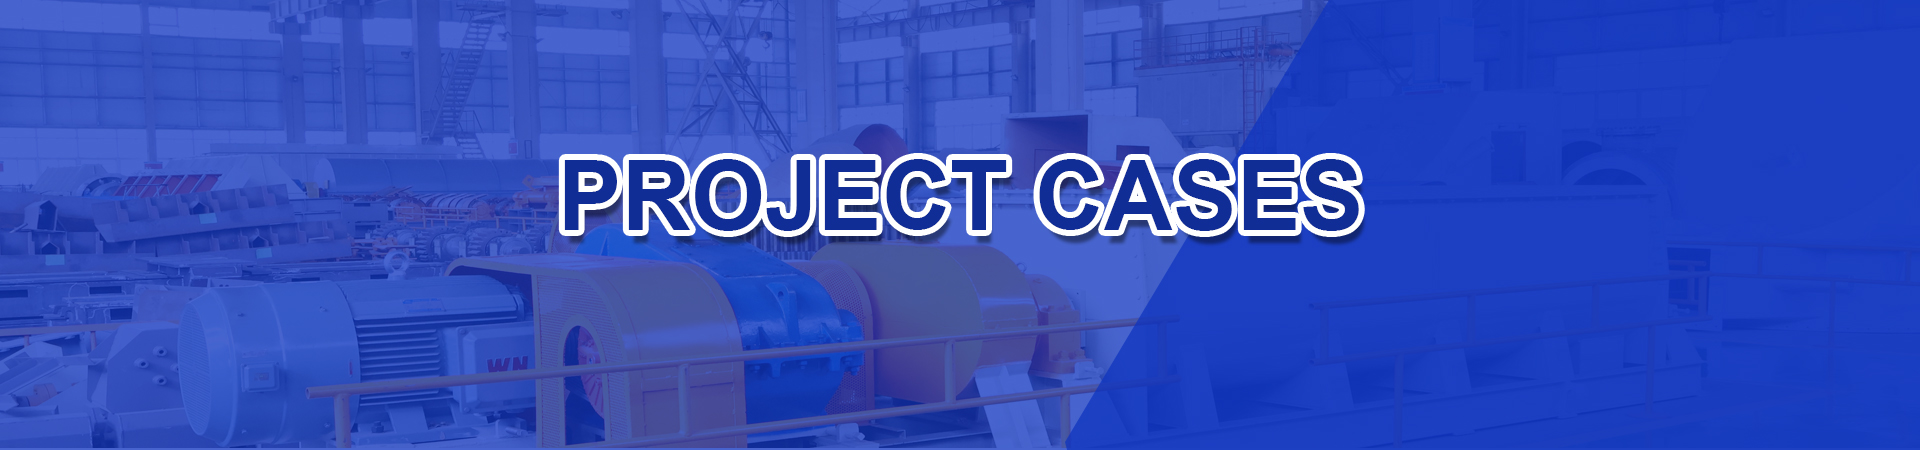 Project cases